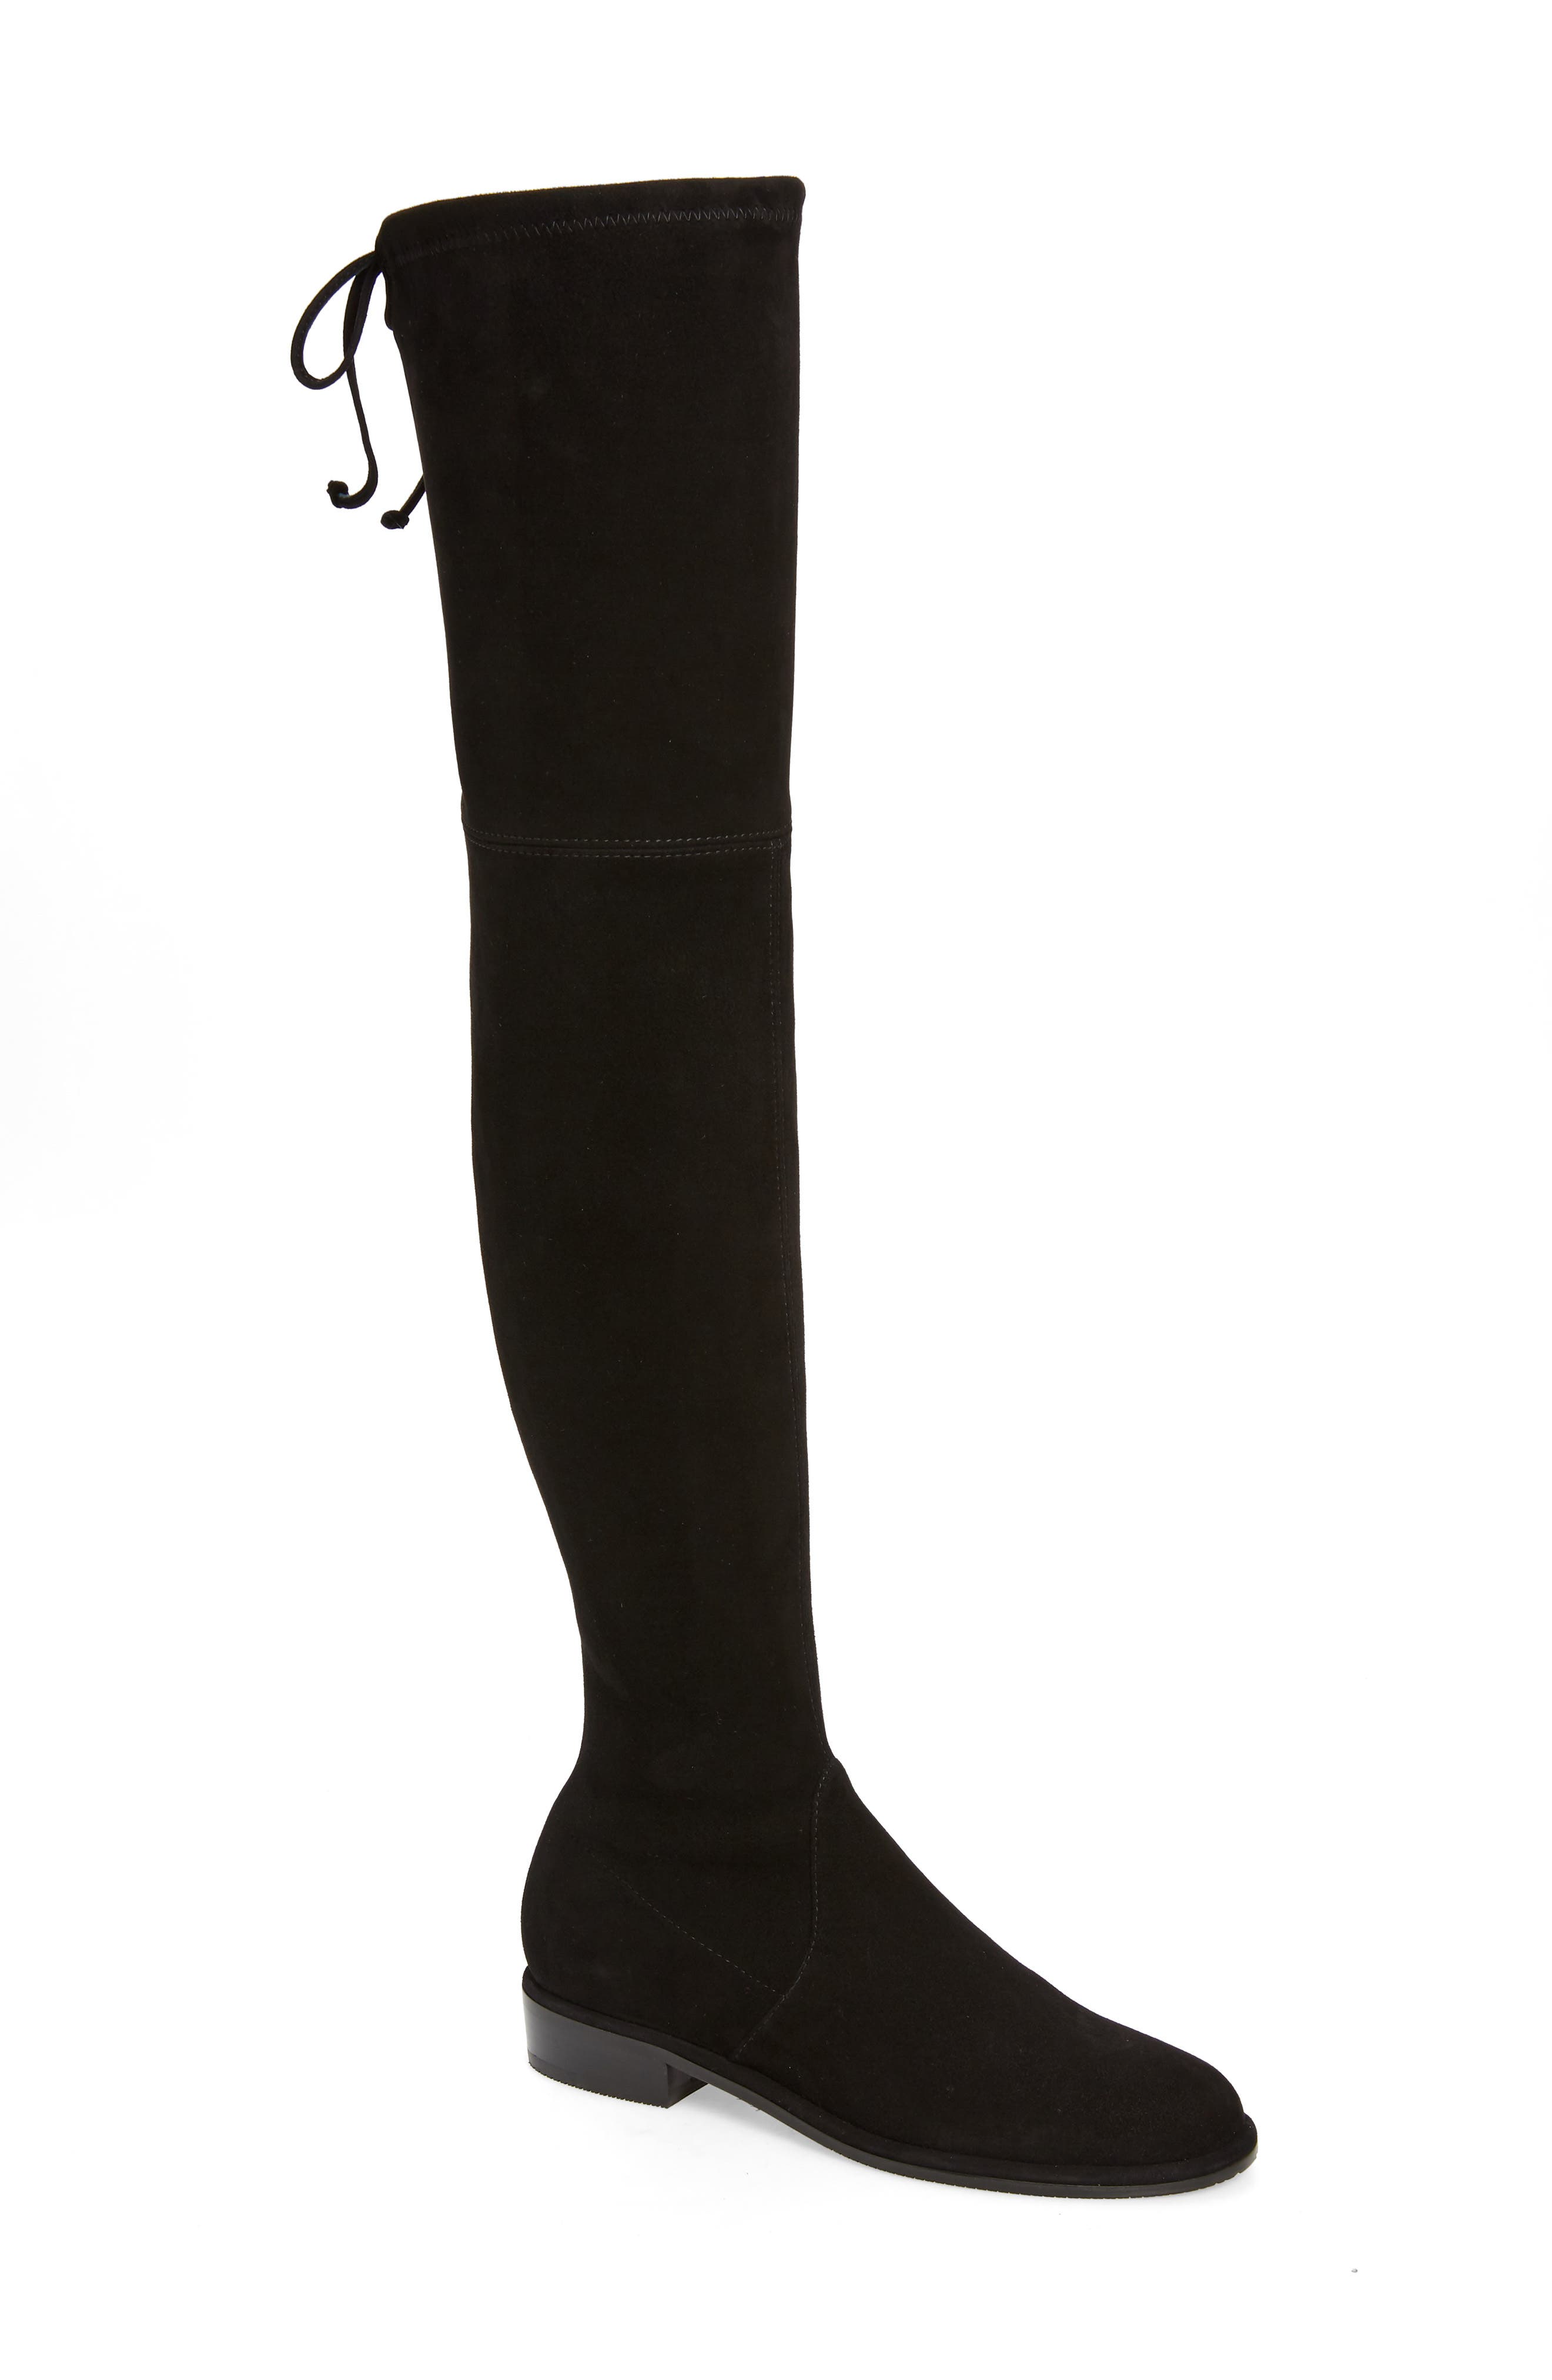 Womens Faux Suede flat Heel Over Knee High Boots Long Pull On Shoes Plus Size